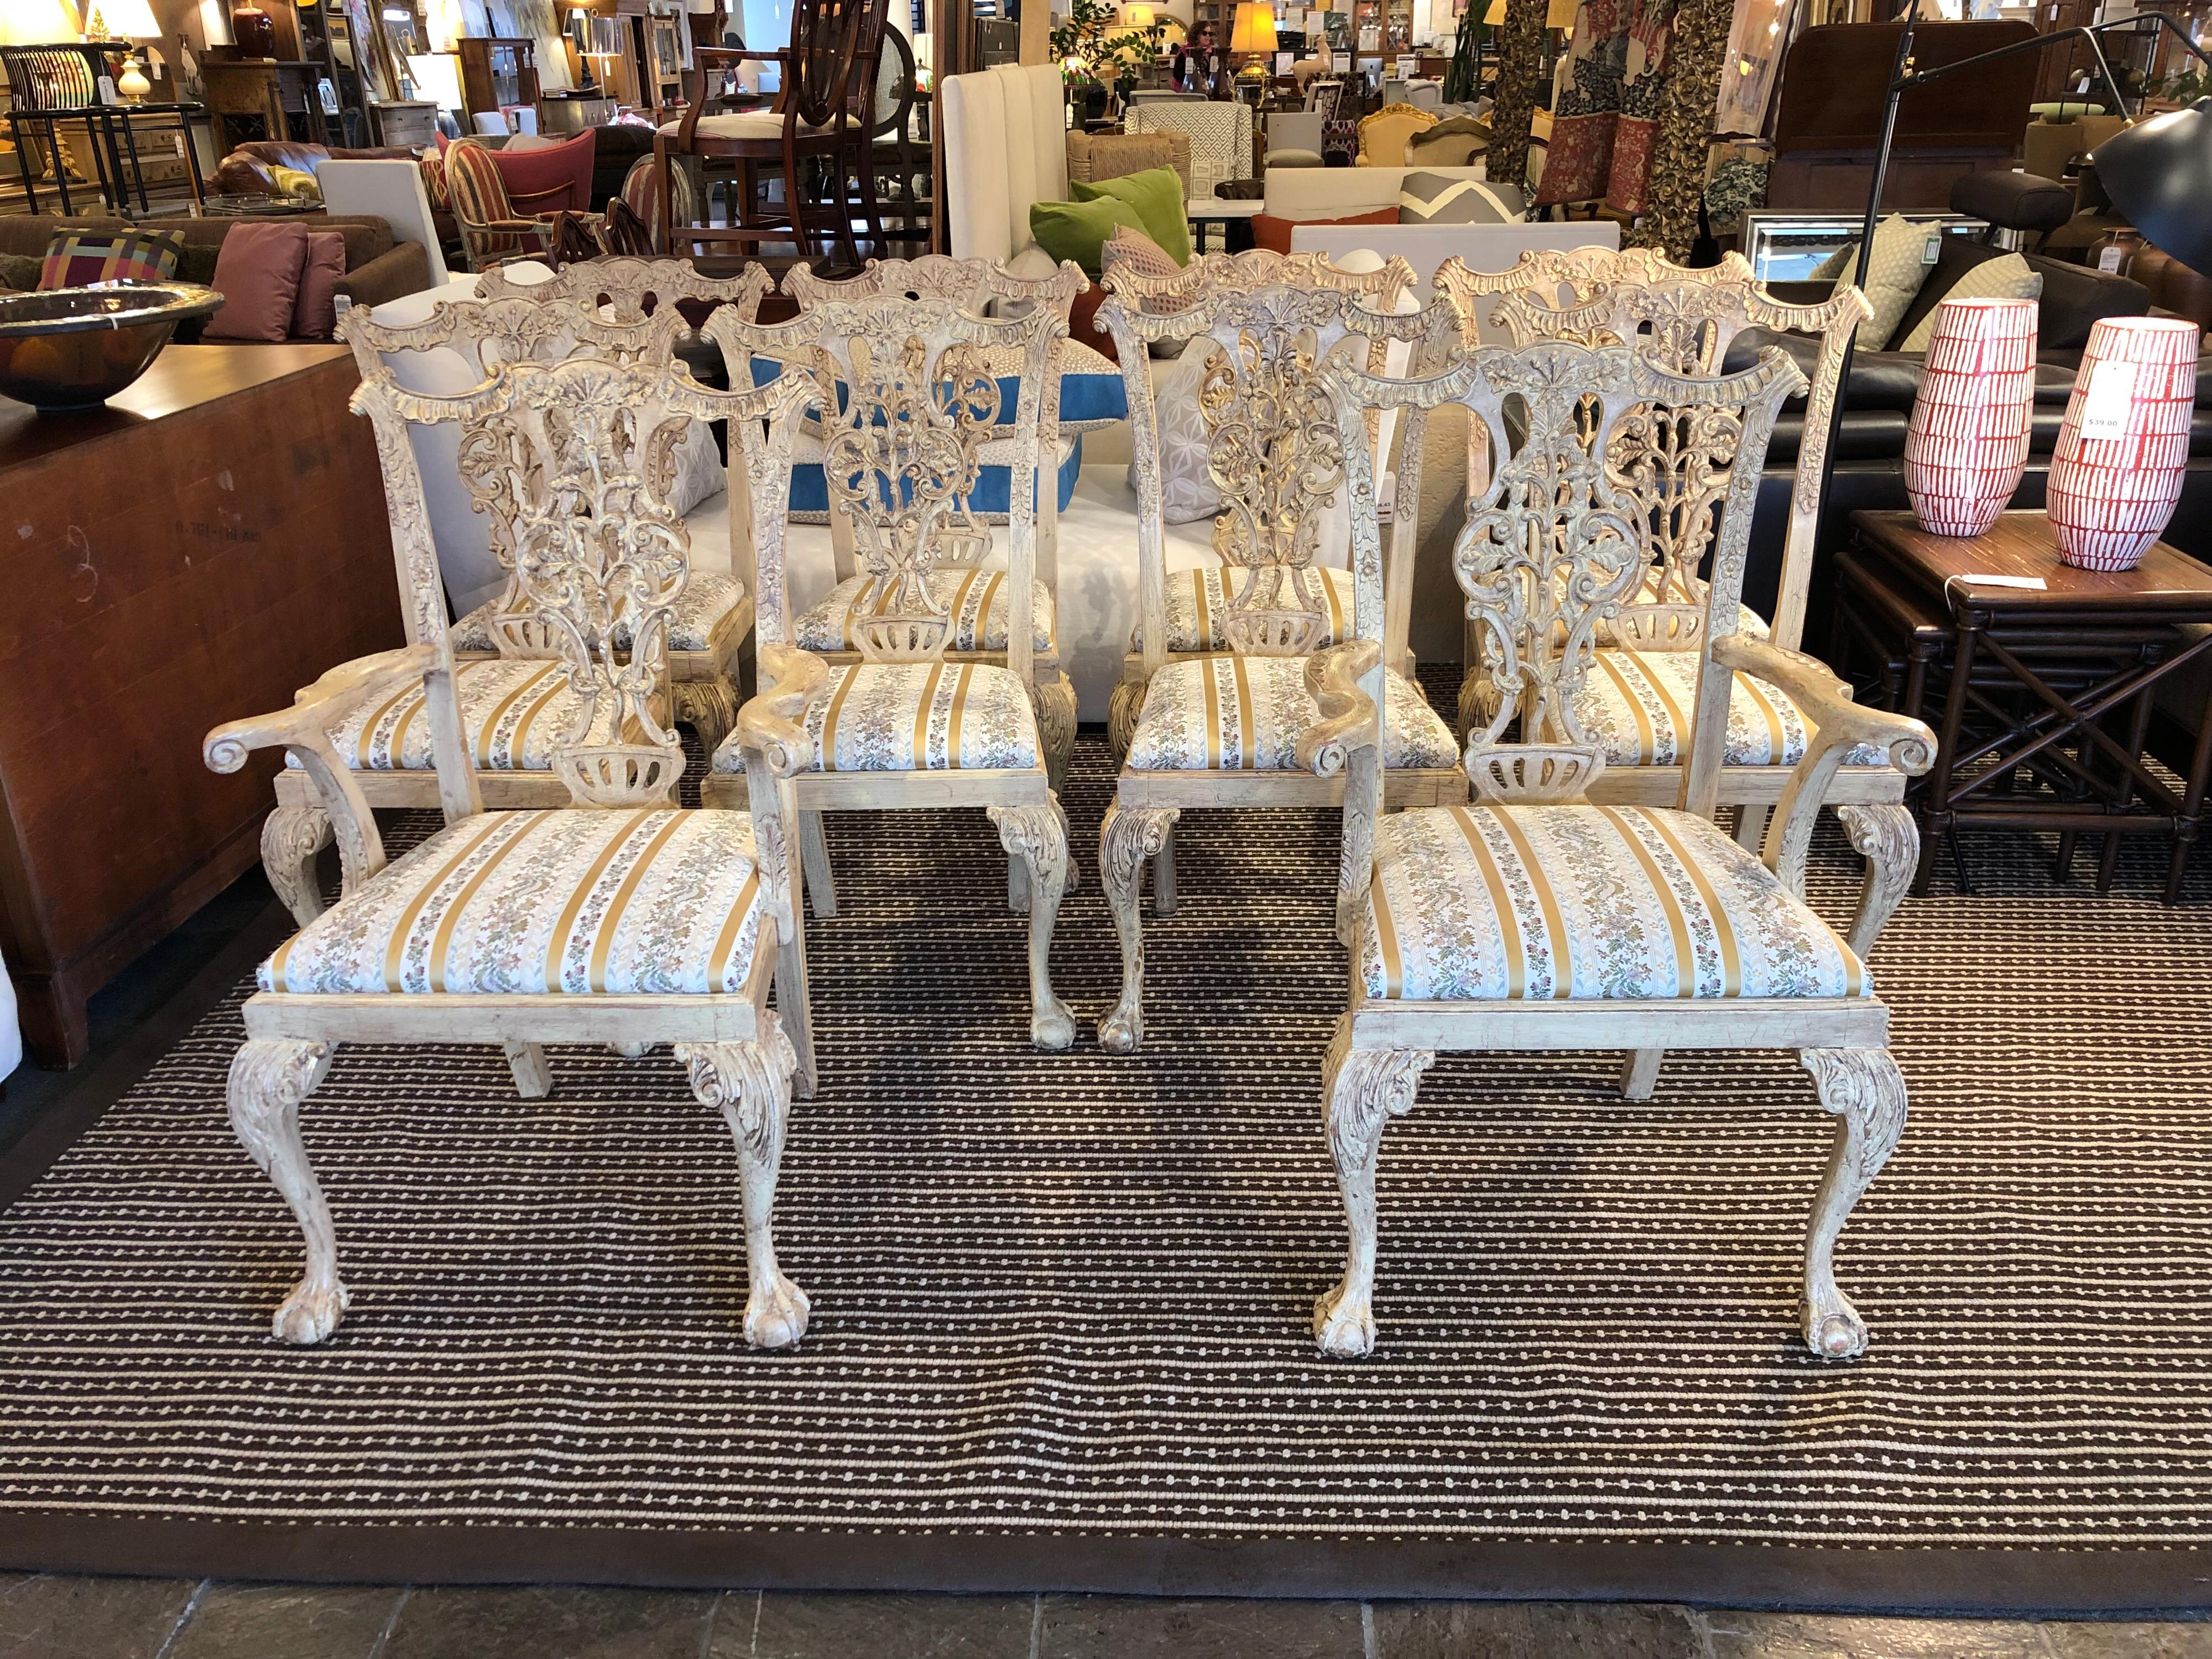 Custom set of 10 Chippendale dining chairs. With the two armchairs, each piece has a multilayer ivory antiqued finish with a crackle effect. Just one more beautiful embellishment to the craved and jacquard upholstered set. Custom elegance from San